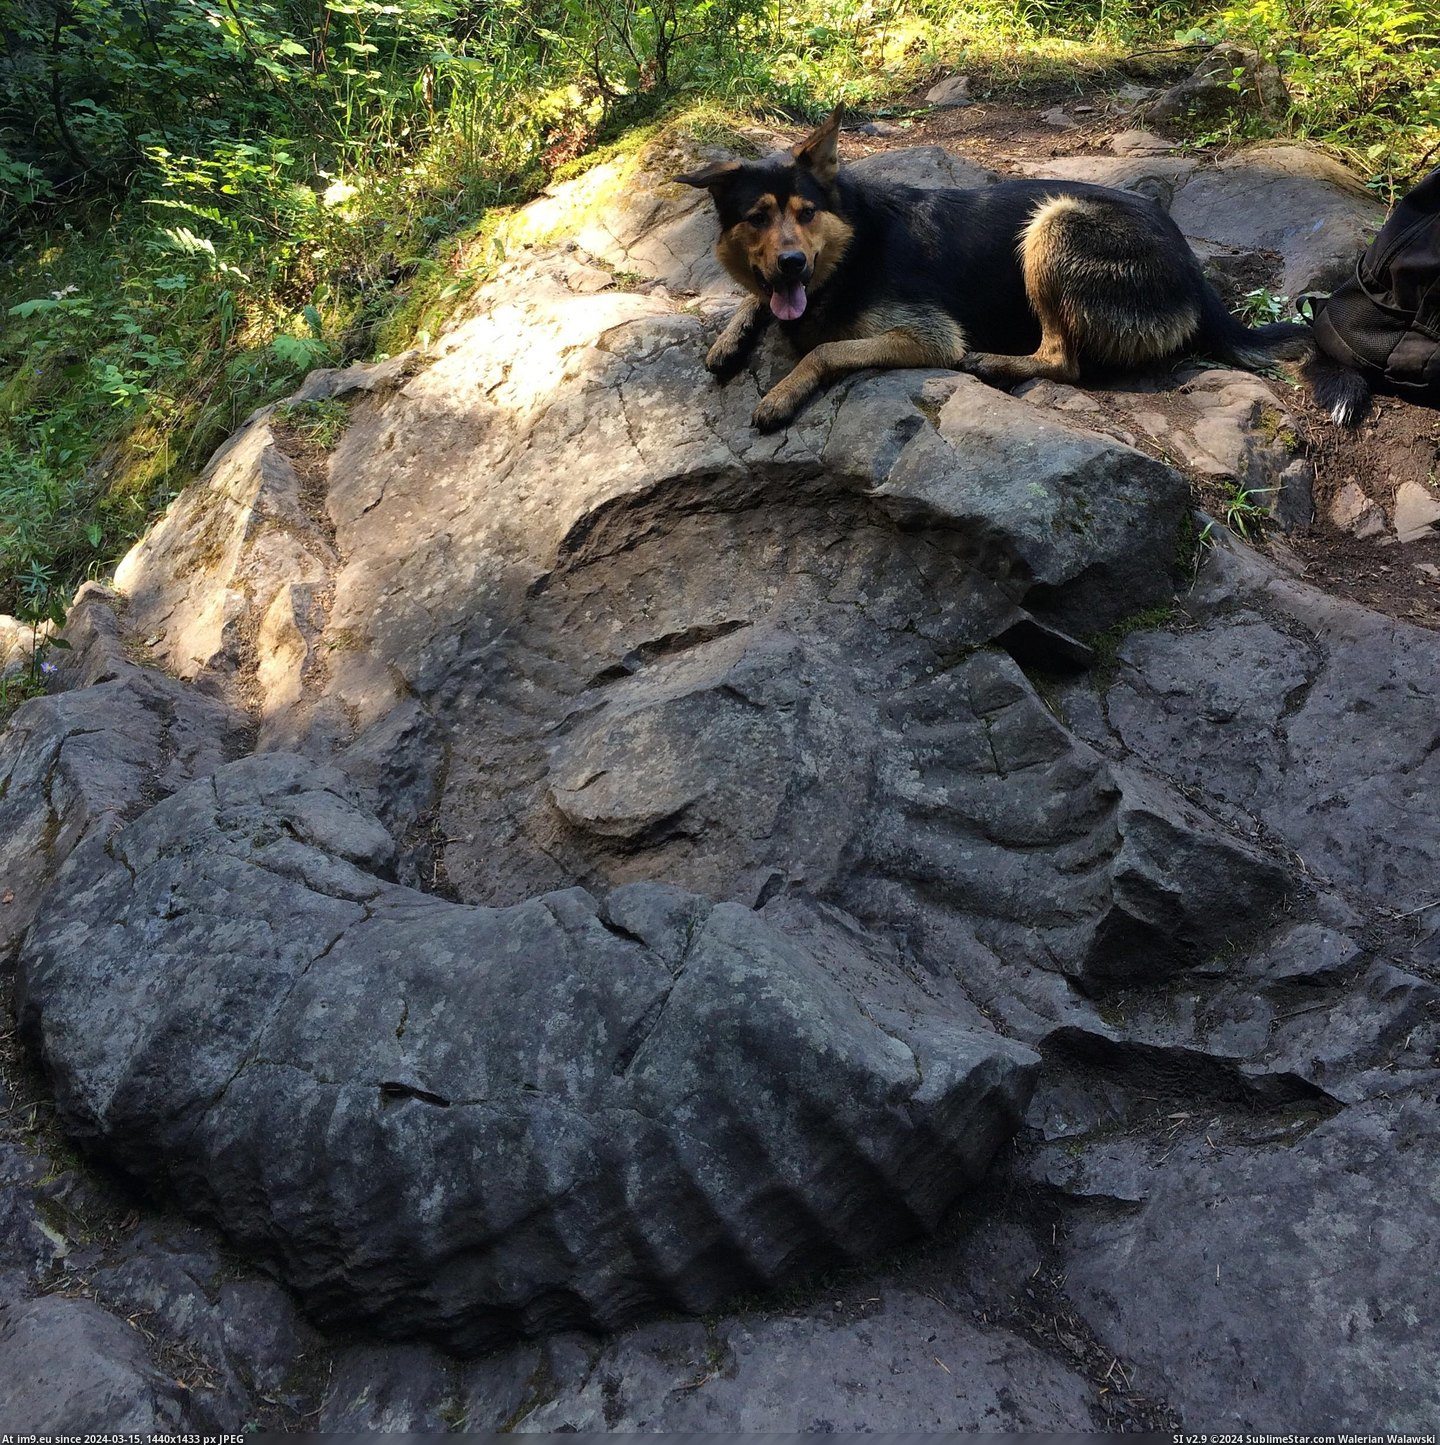 #Giant #Fossil #Otto [Pics] Giant Ammonite fossil and Otto Pic. (Изображение из альбом My r/PICS favs))